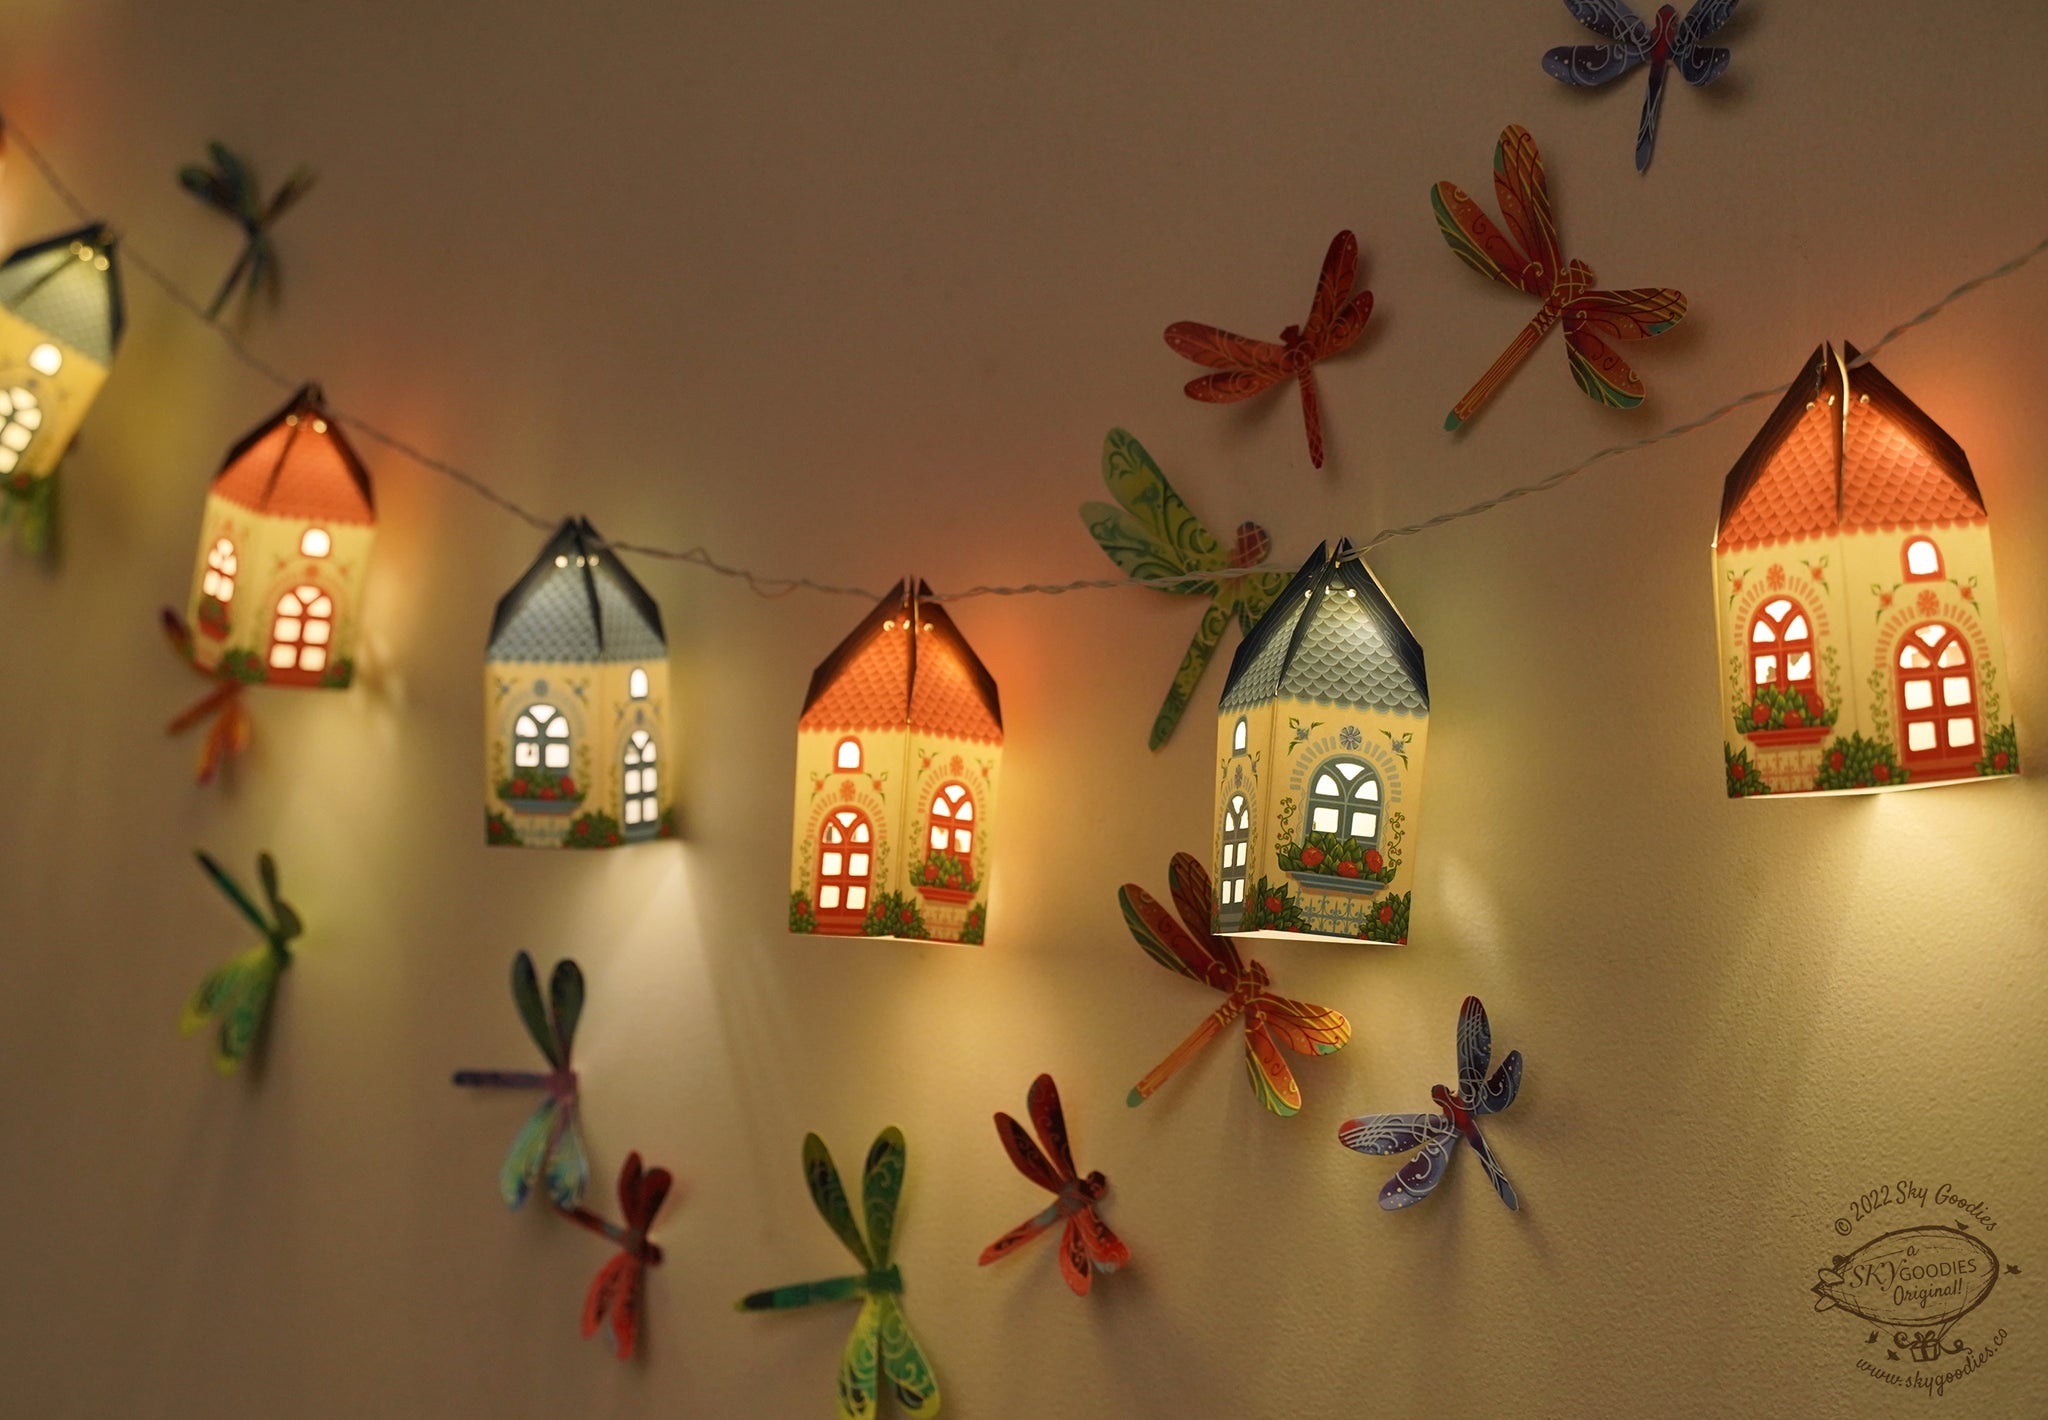 Paper Mini Happy Home Fairy Lights & Dragonflies Wall Decor Combo | Save 20%